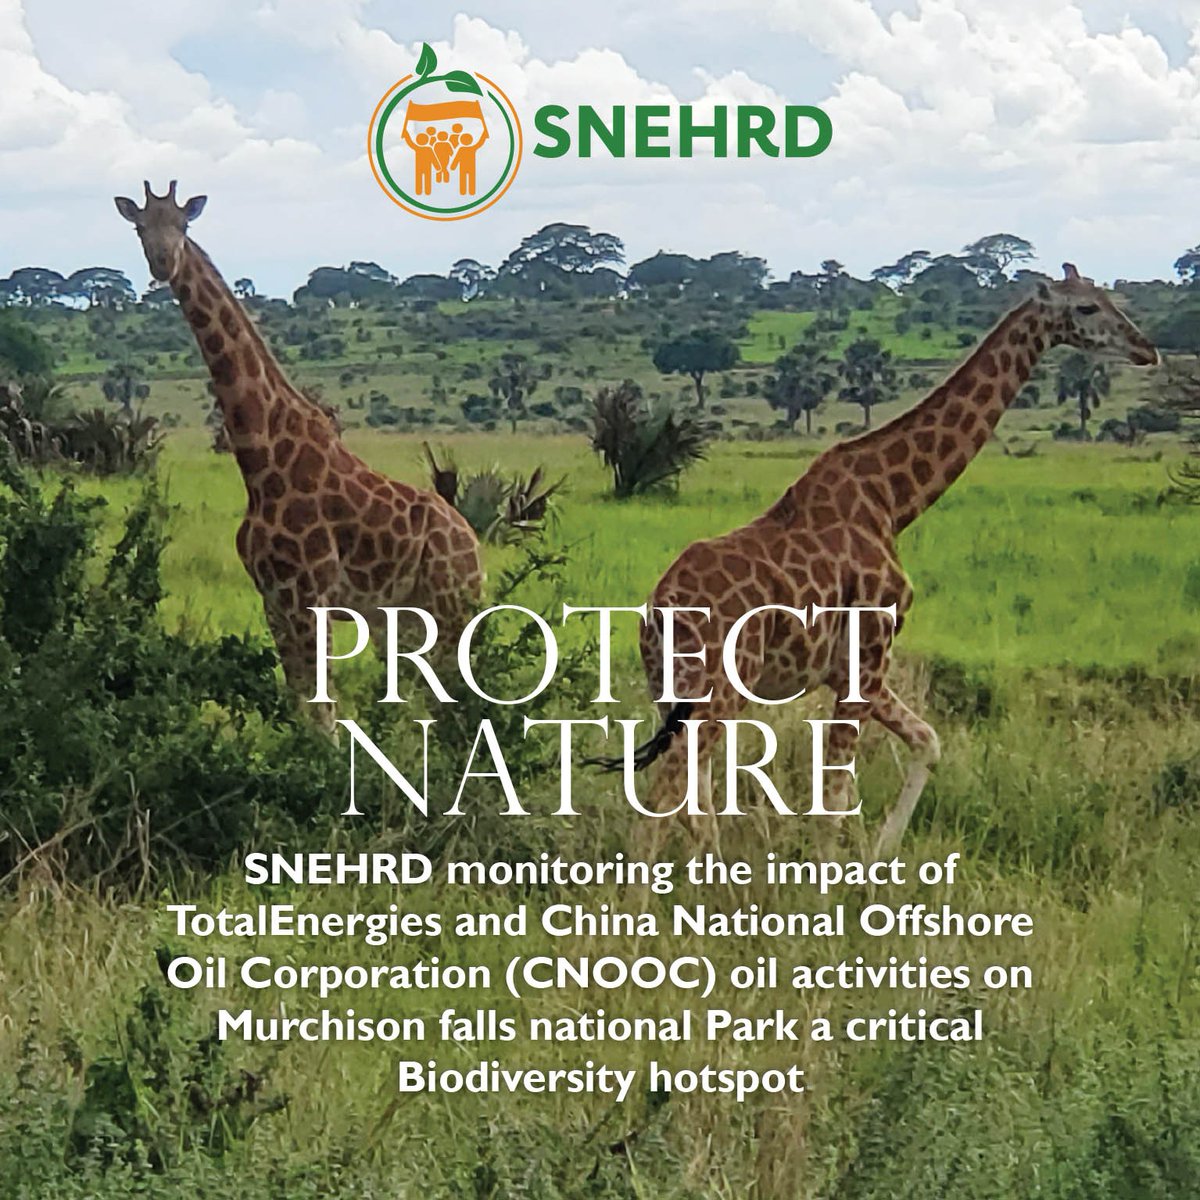 To avoid these oil and gas threats to biodiversity,  grass root EHRDs need to be strengthened and equipped to monitor, report, and pressure both government and Oil companies to stop these unsustainable developments